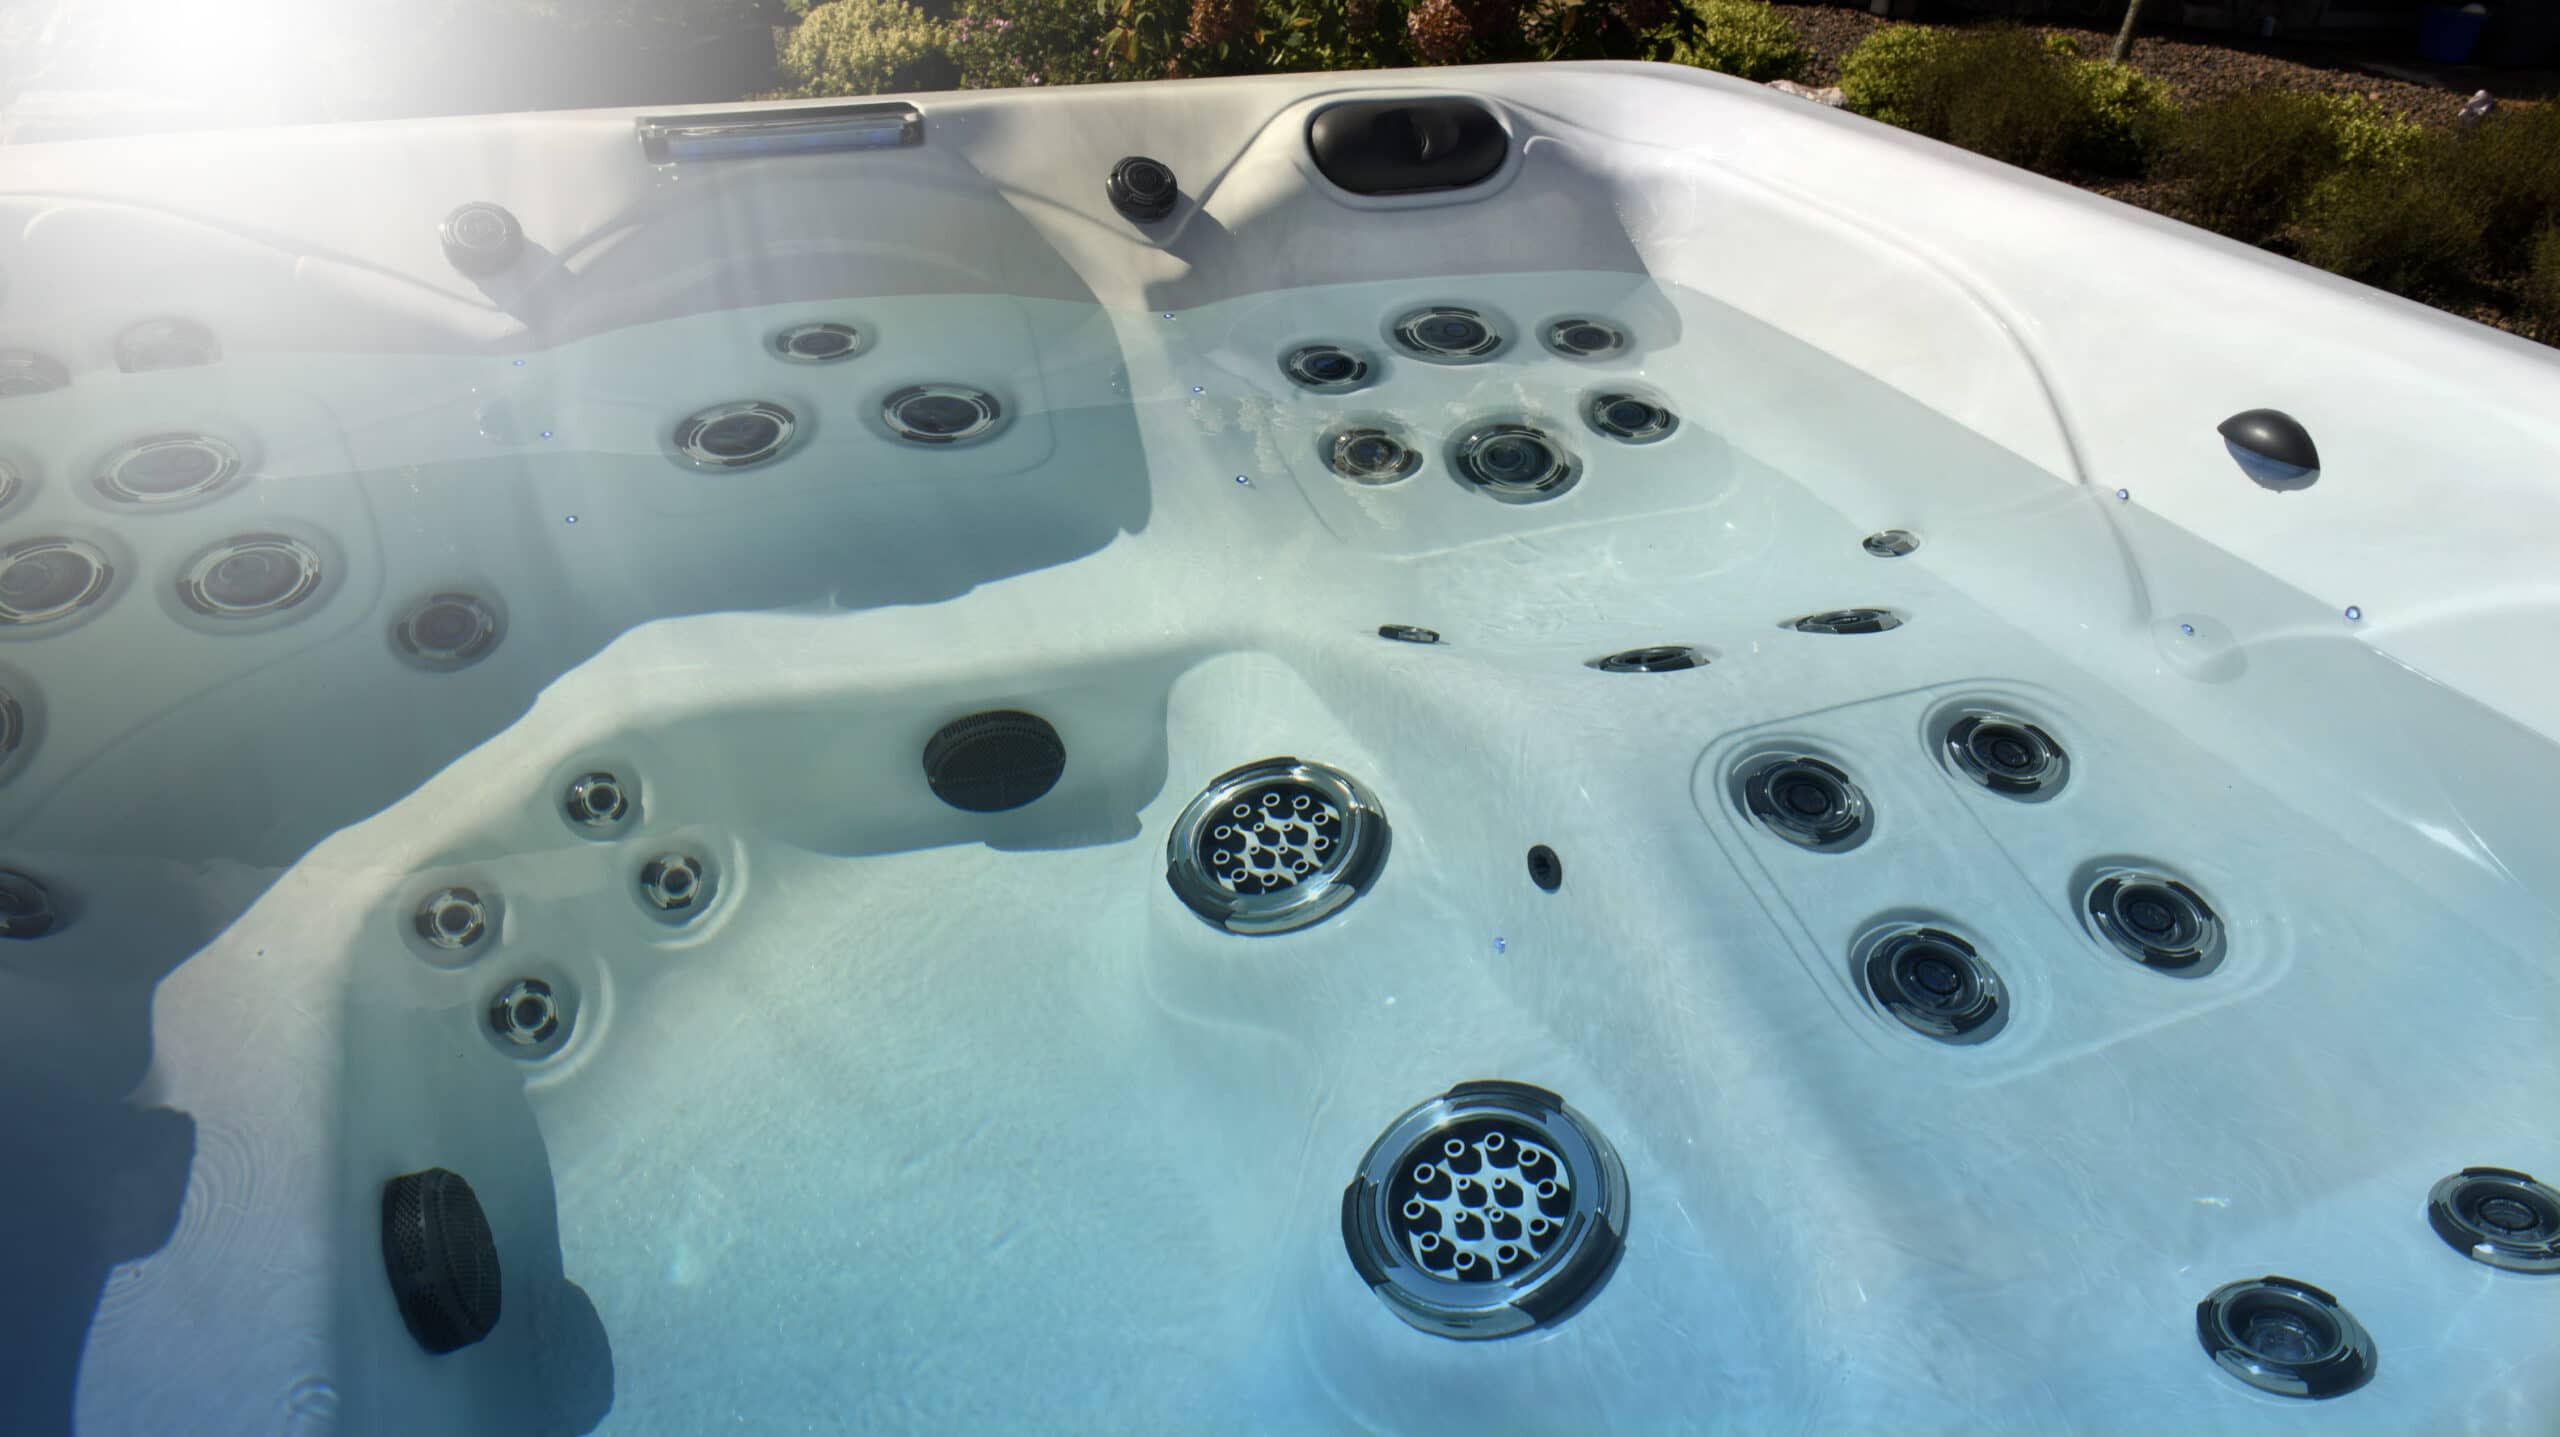 Hot Tub Water Yellow After Filling: Causes and Solutions